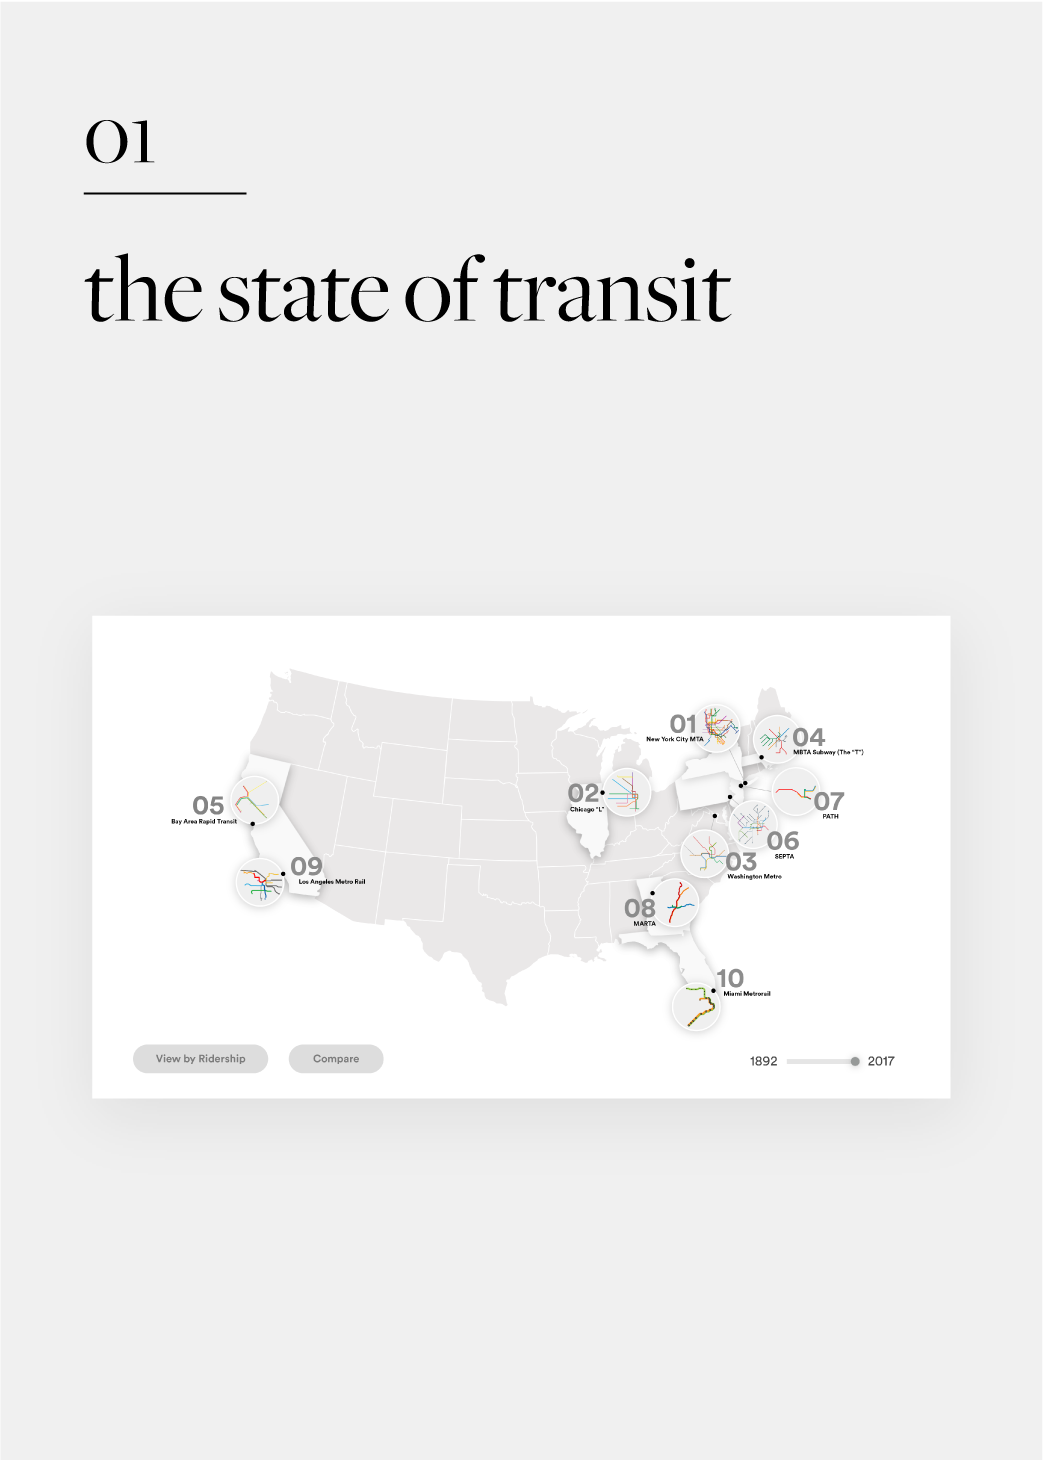 The State of Transit